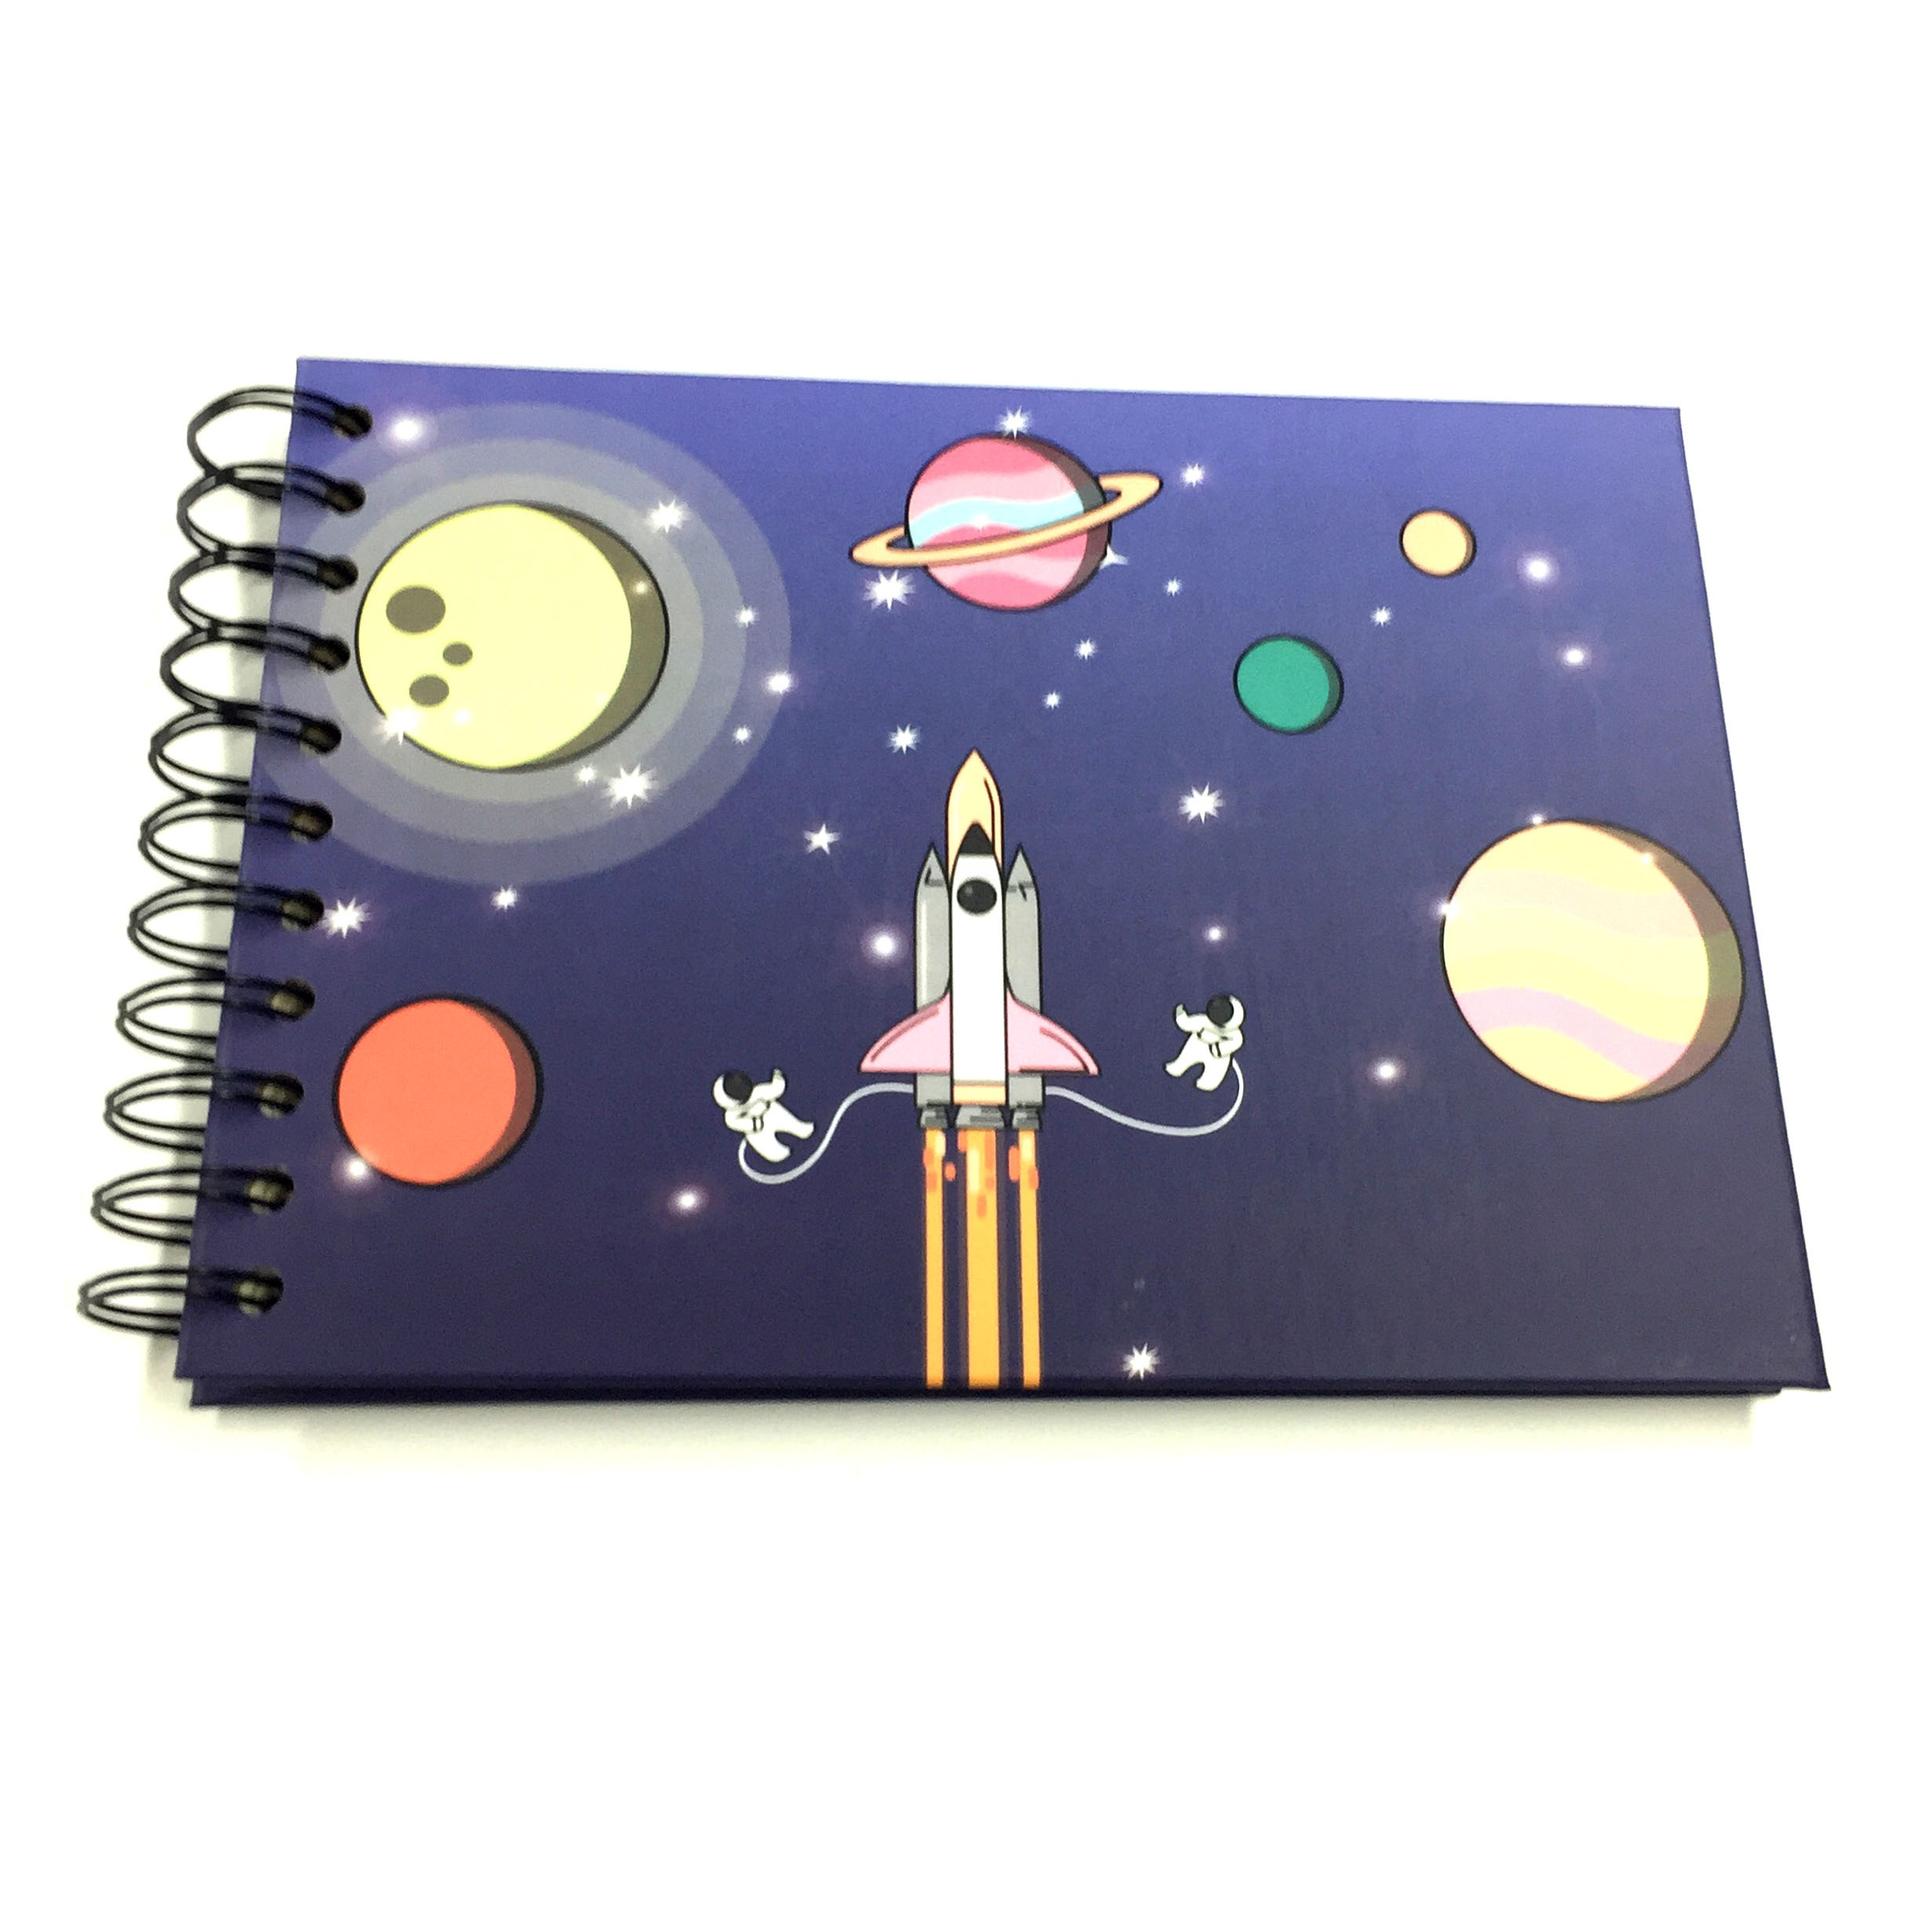 product-Bulk Purchase Spiral Bound 5x7 Self Stick Photo Album for Christmas With 20 Pages,custom log-2